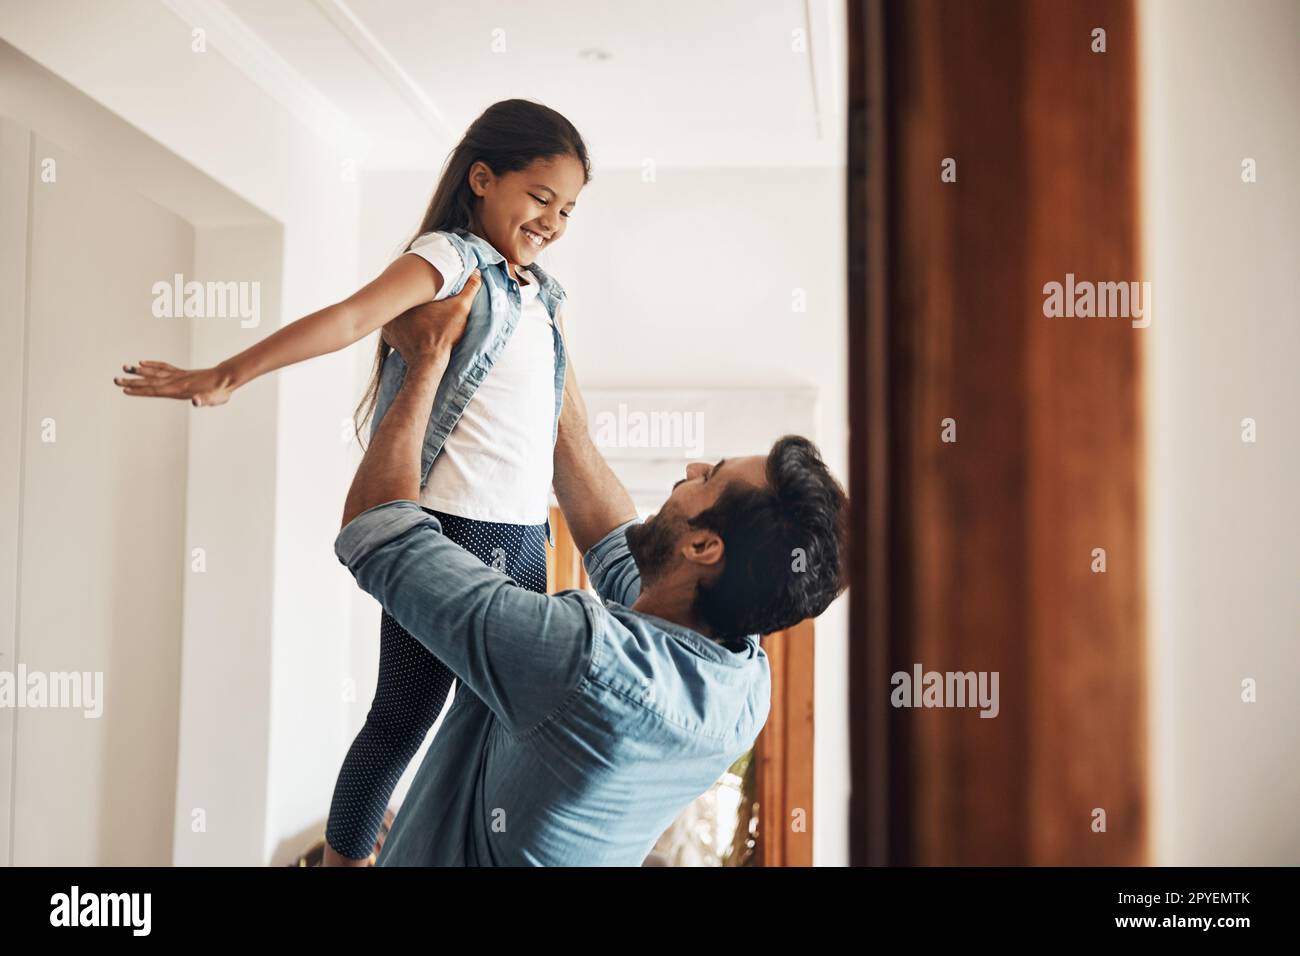 Spending time with dad is so much fun. a happy father and daughter playing together at home. Stock Photo